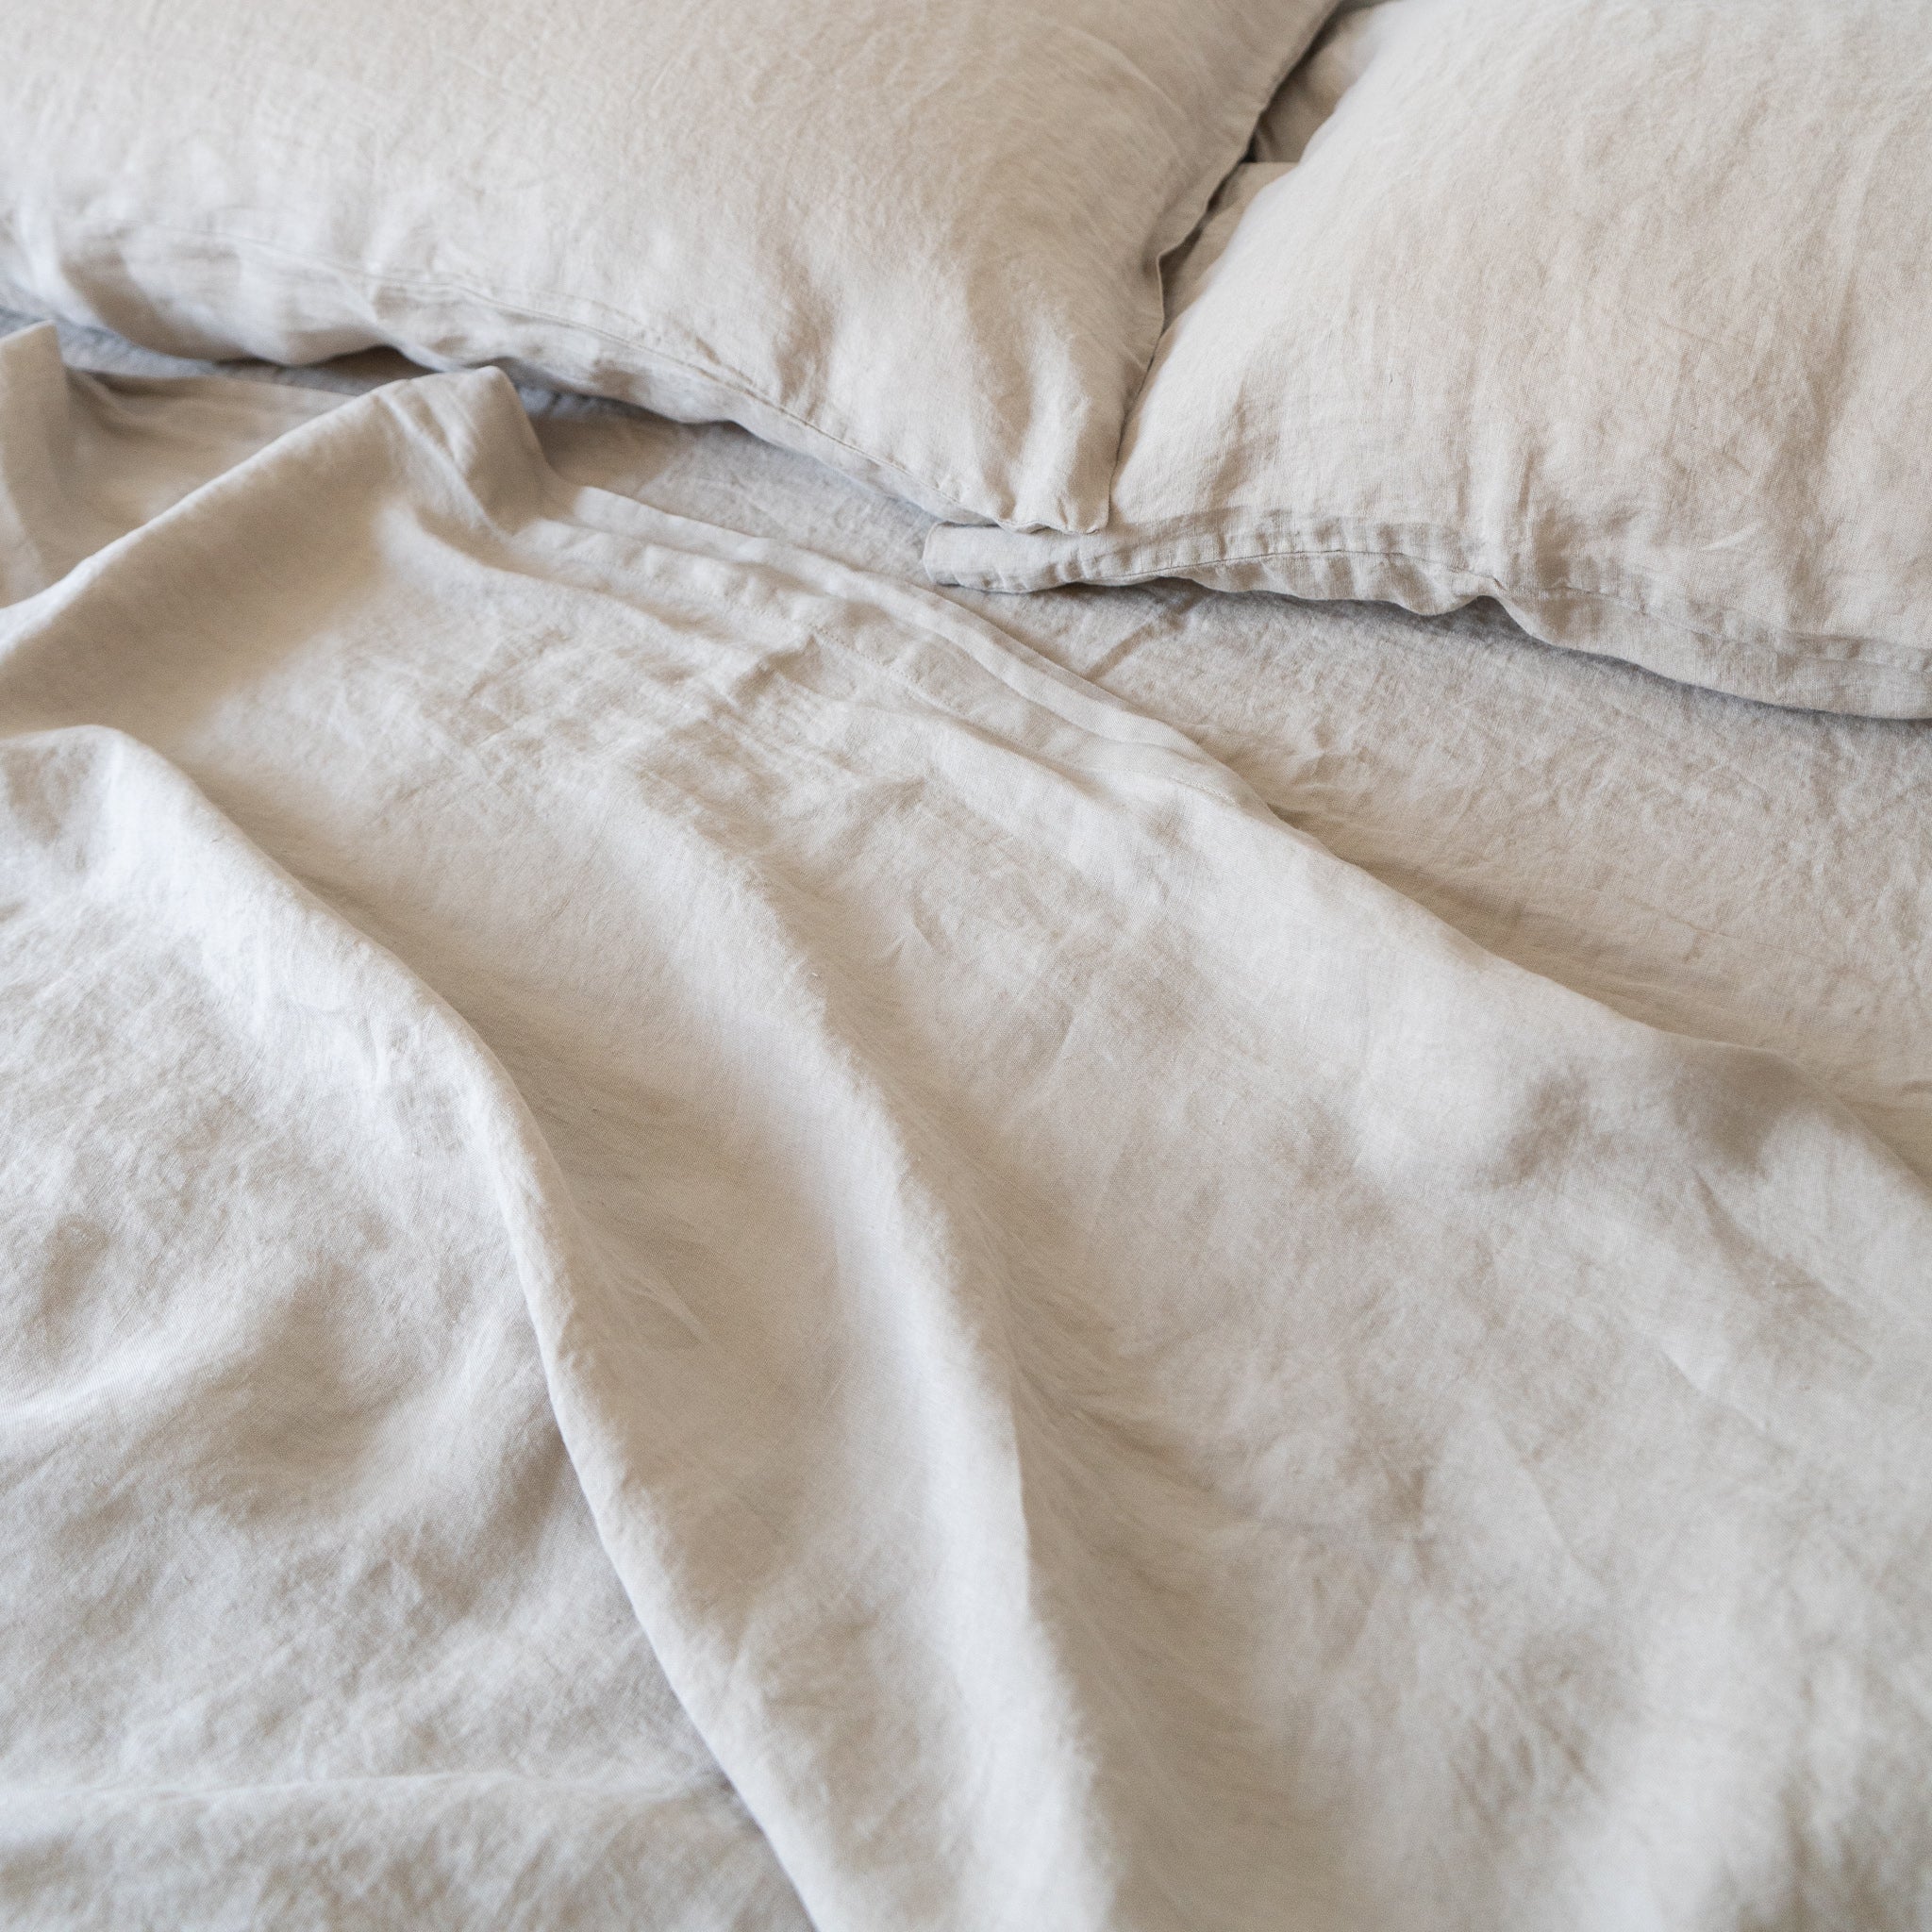 Caring for linen: How to dry linen sheets